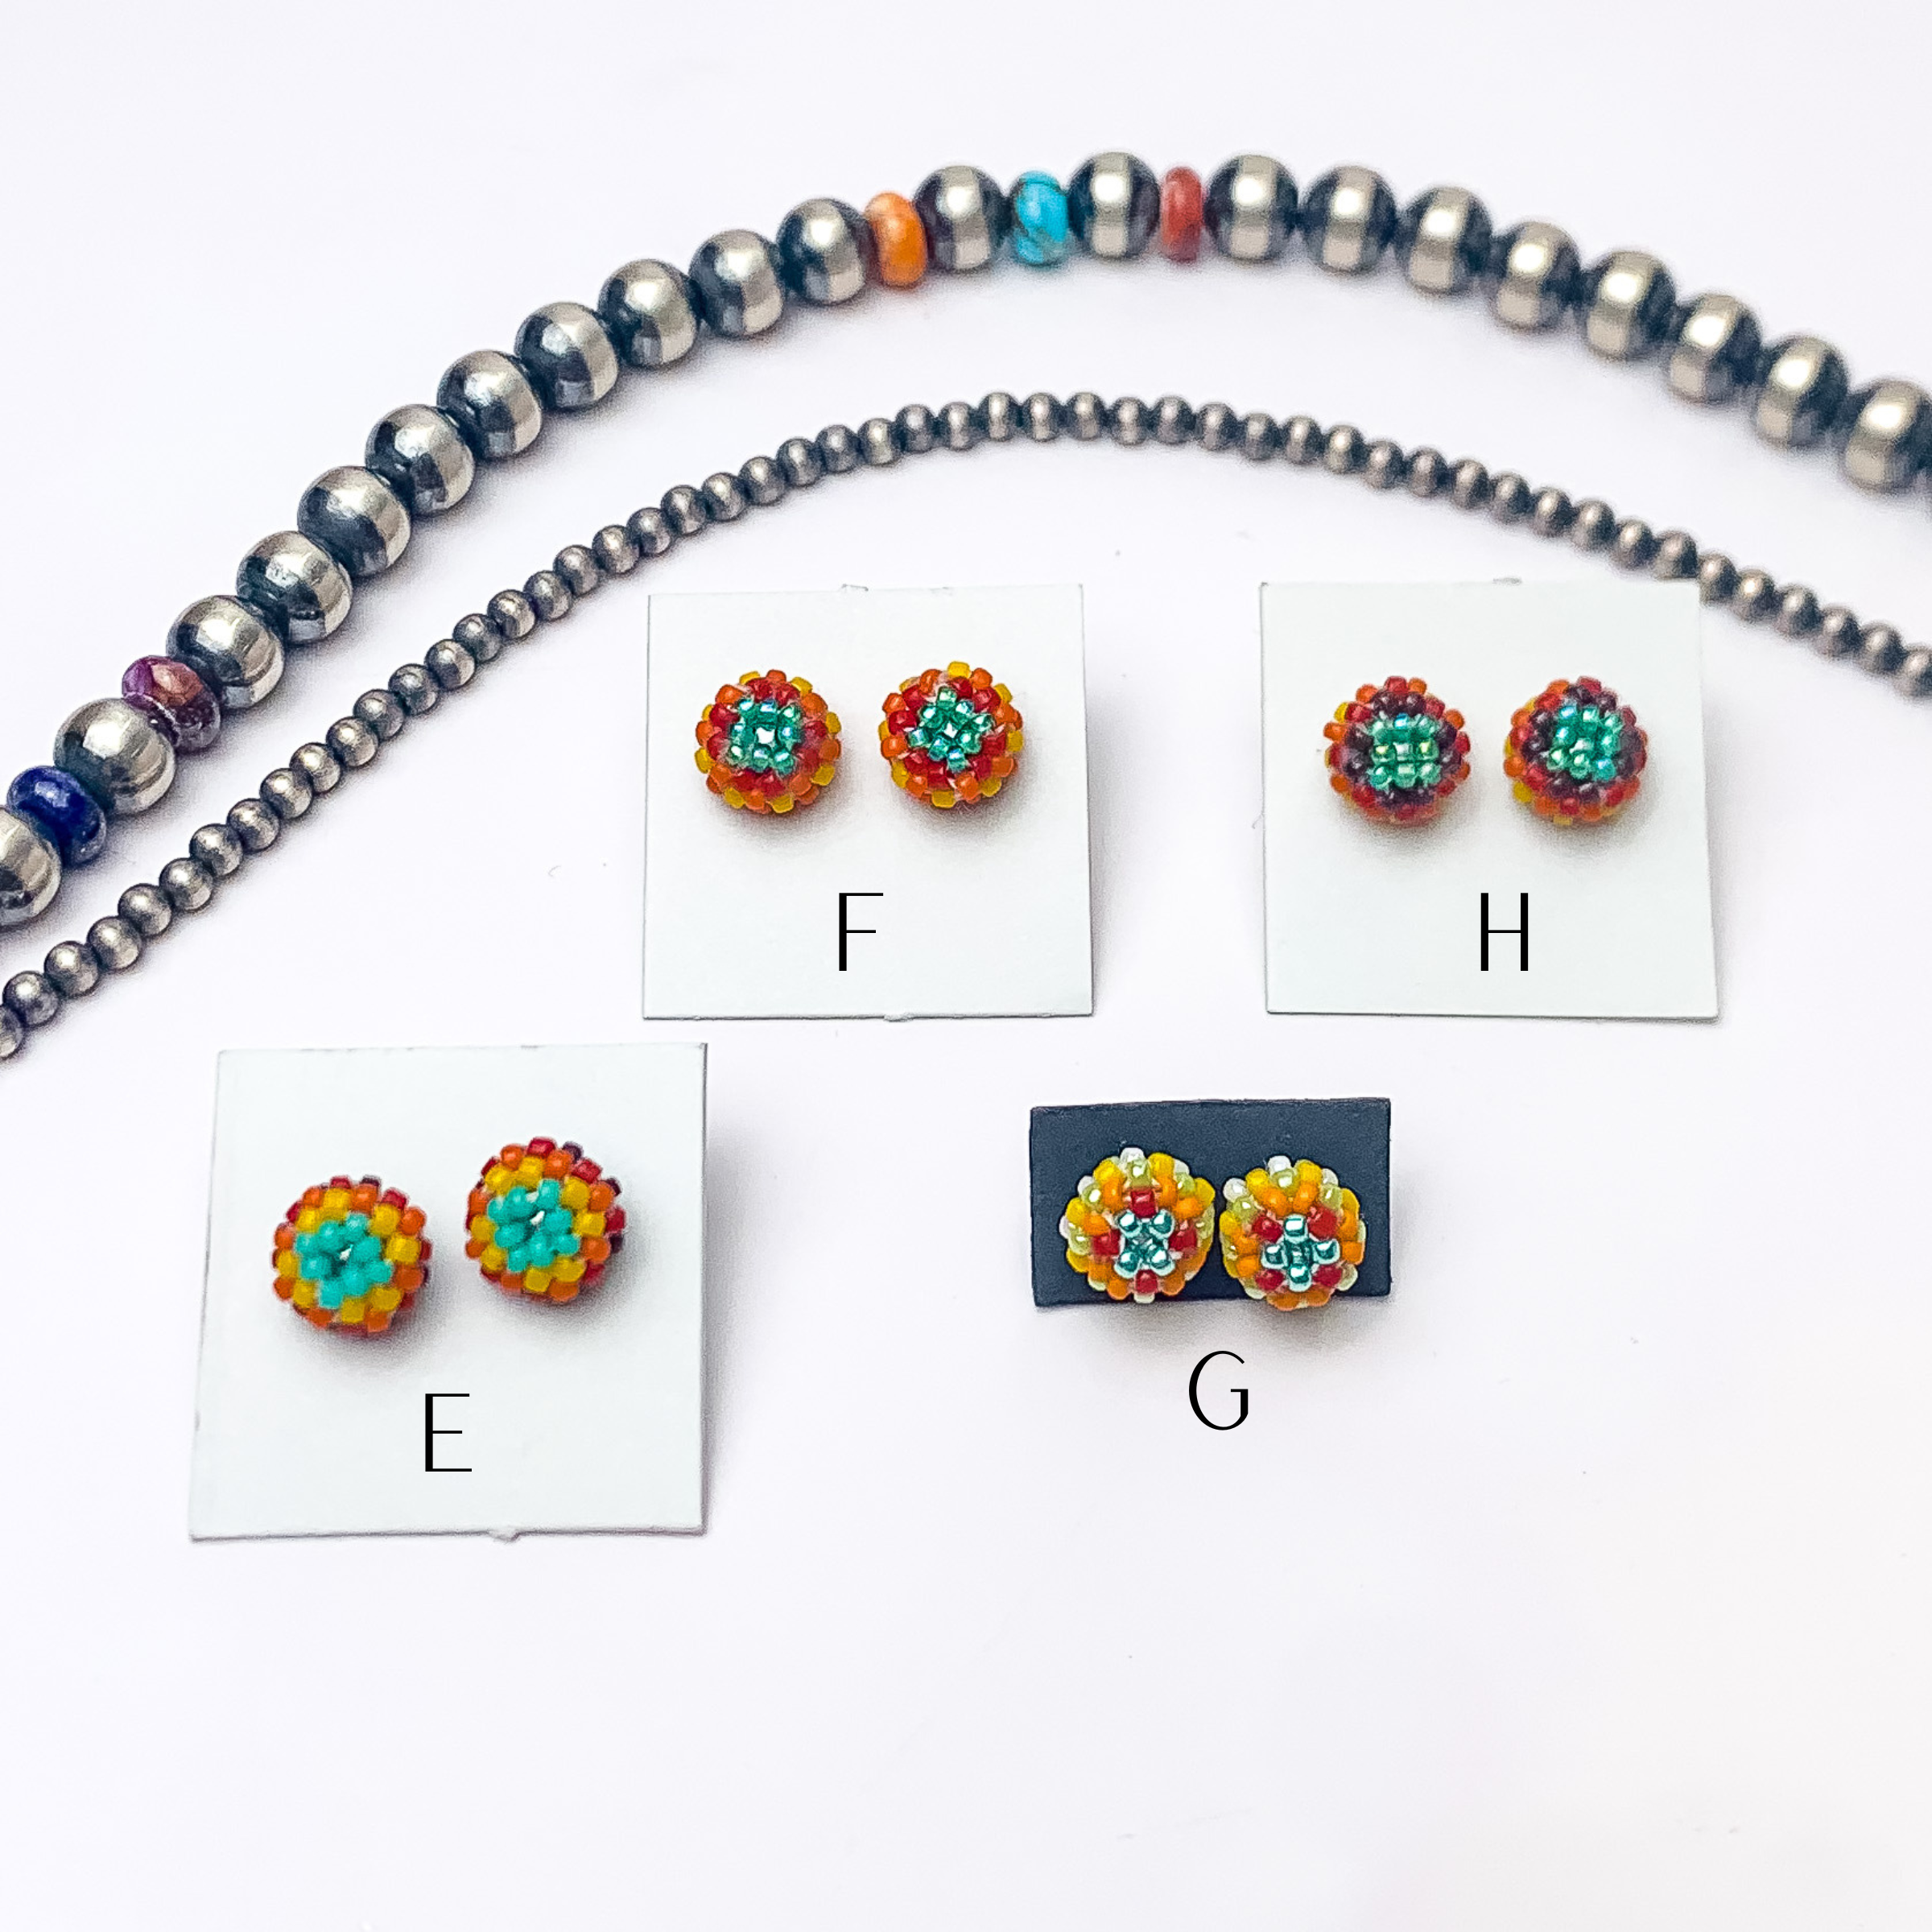 Navajo | Navajo Handmade Beaded Stud Earrings in Turquoise, Yellow, and Red - Giddy Up Glamour Boutique